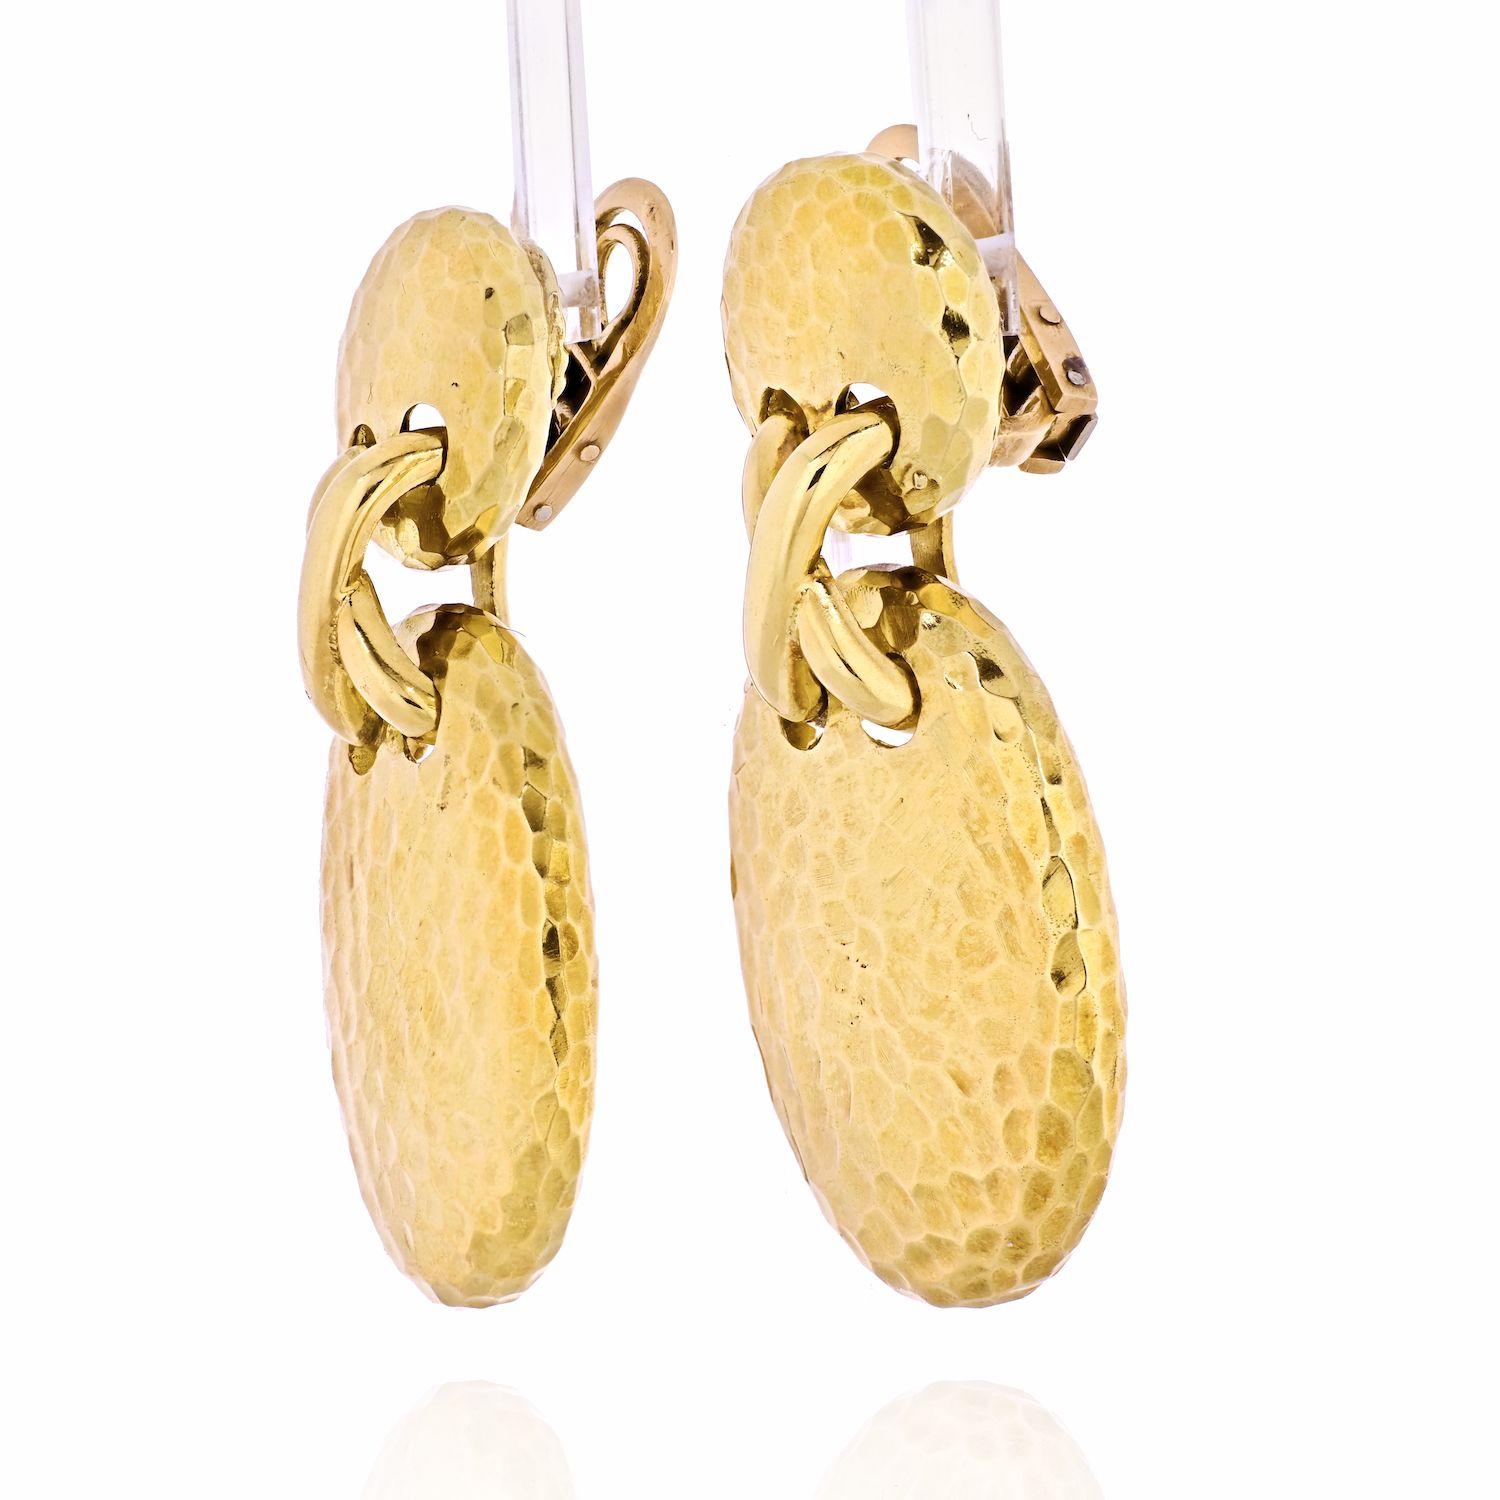 Presented here is a pair of yellow gold hammered finish Van Cleef & Arpels clip-earrings. 
Measuring about 2 inches long these earrings offer a chic way to brighten up your everyday outfit. Attractive high polish look.
